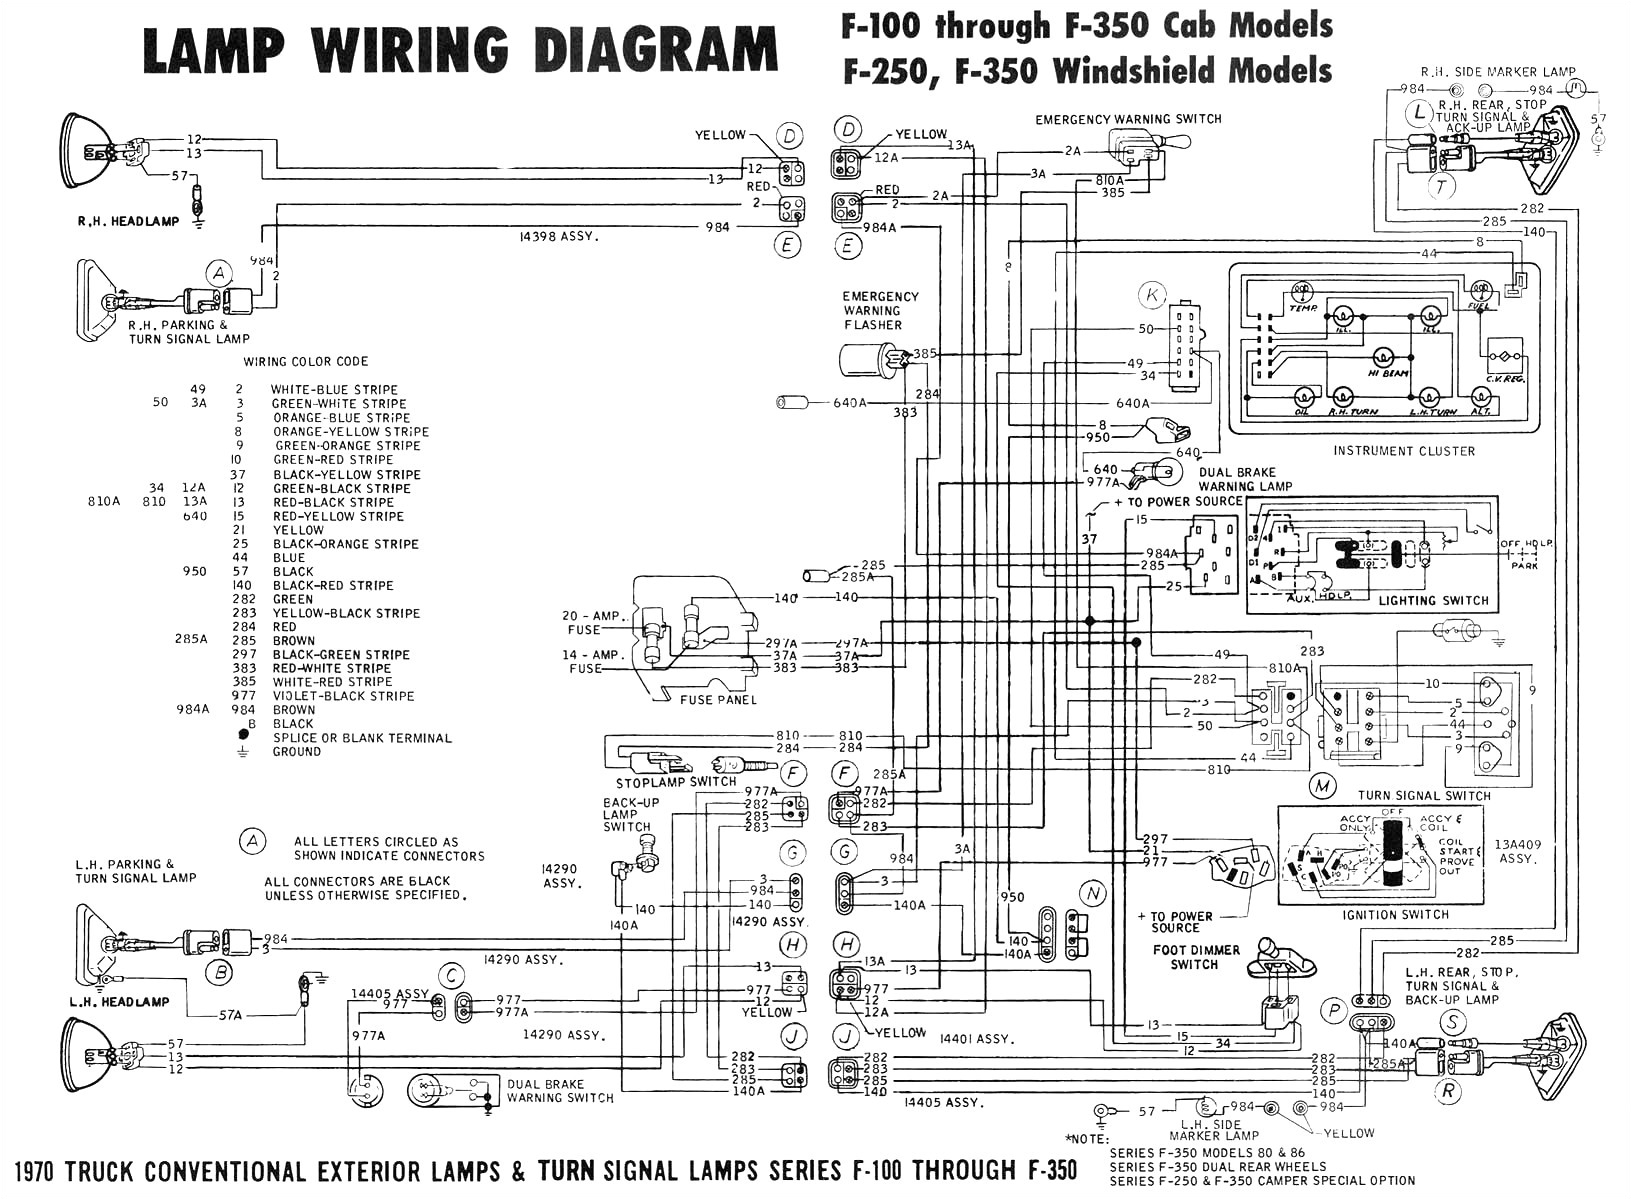 2000 ford expedition multifunction switch wiring diagram wiring 2000 ford expedition horn wiring as well as 2000 ford expedition